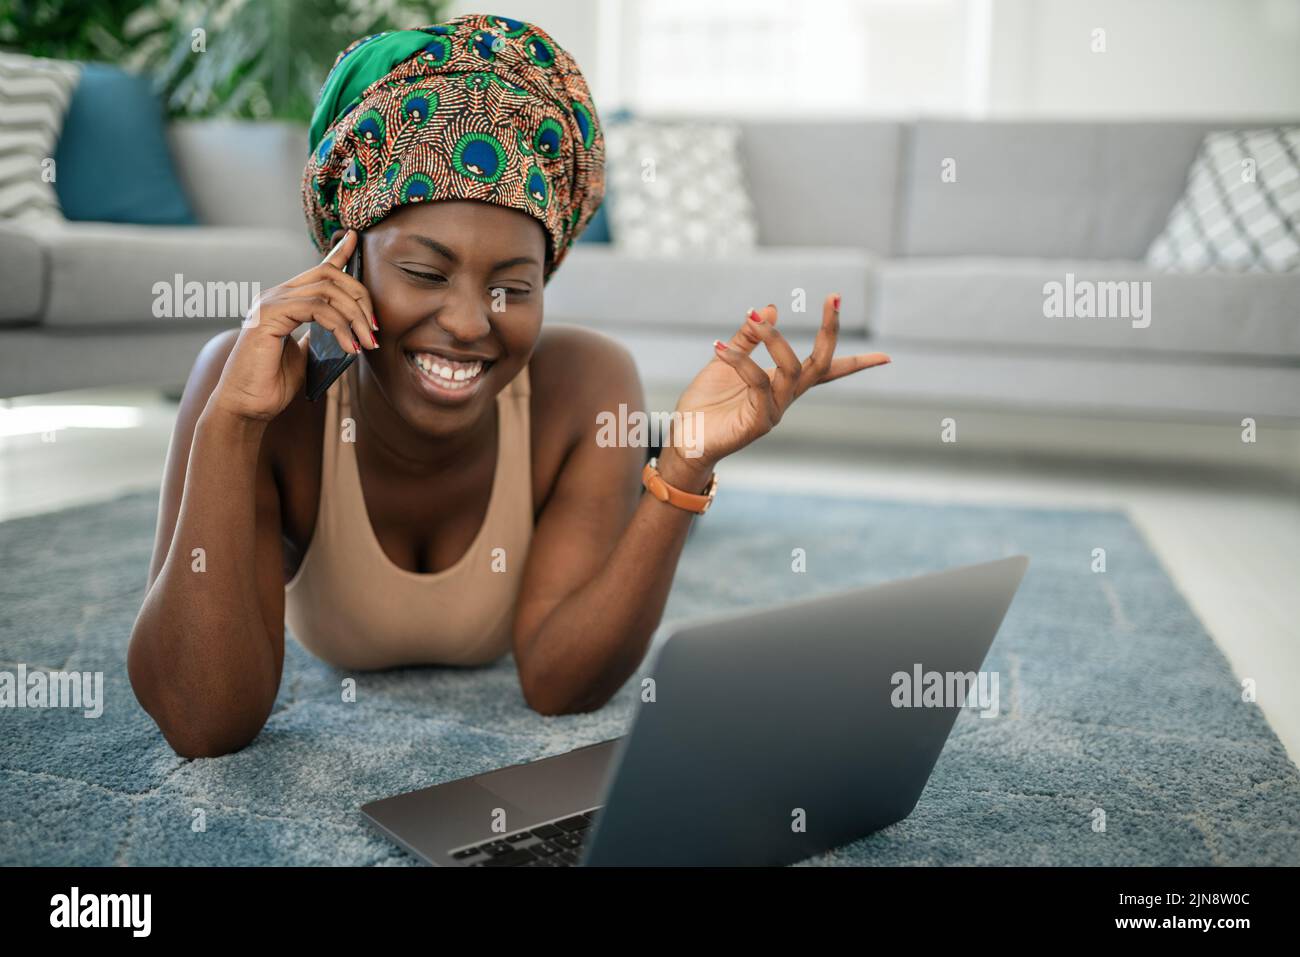 Beautiful African woman at home, smiling and laughing, using mobile smart phone, wearing traditional headscarf, surprised and happy Stock Photo